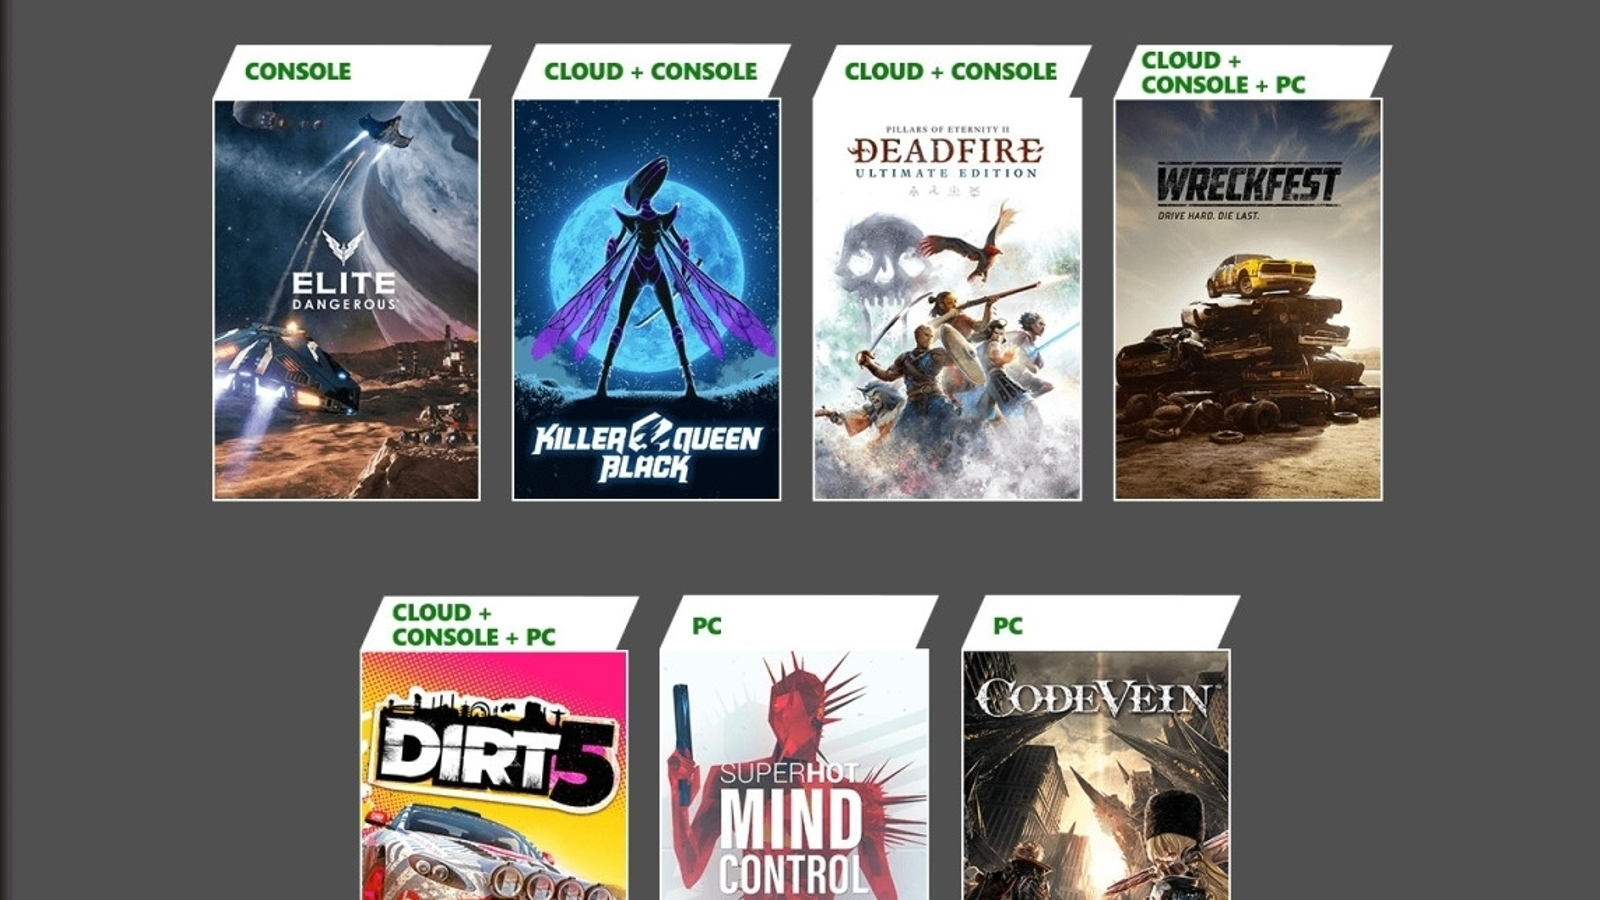 Microsoft announces new February games coming to Xbox Game Pass